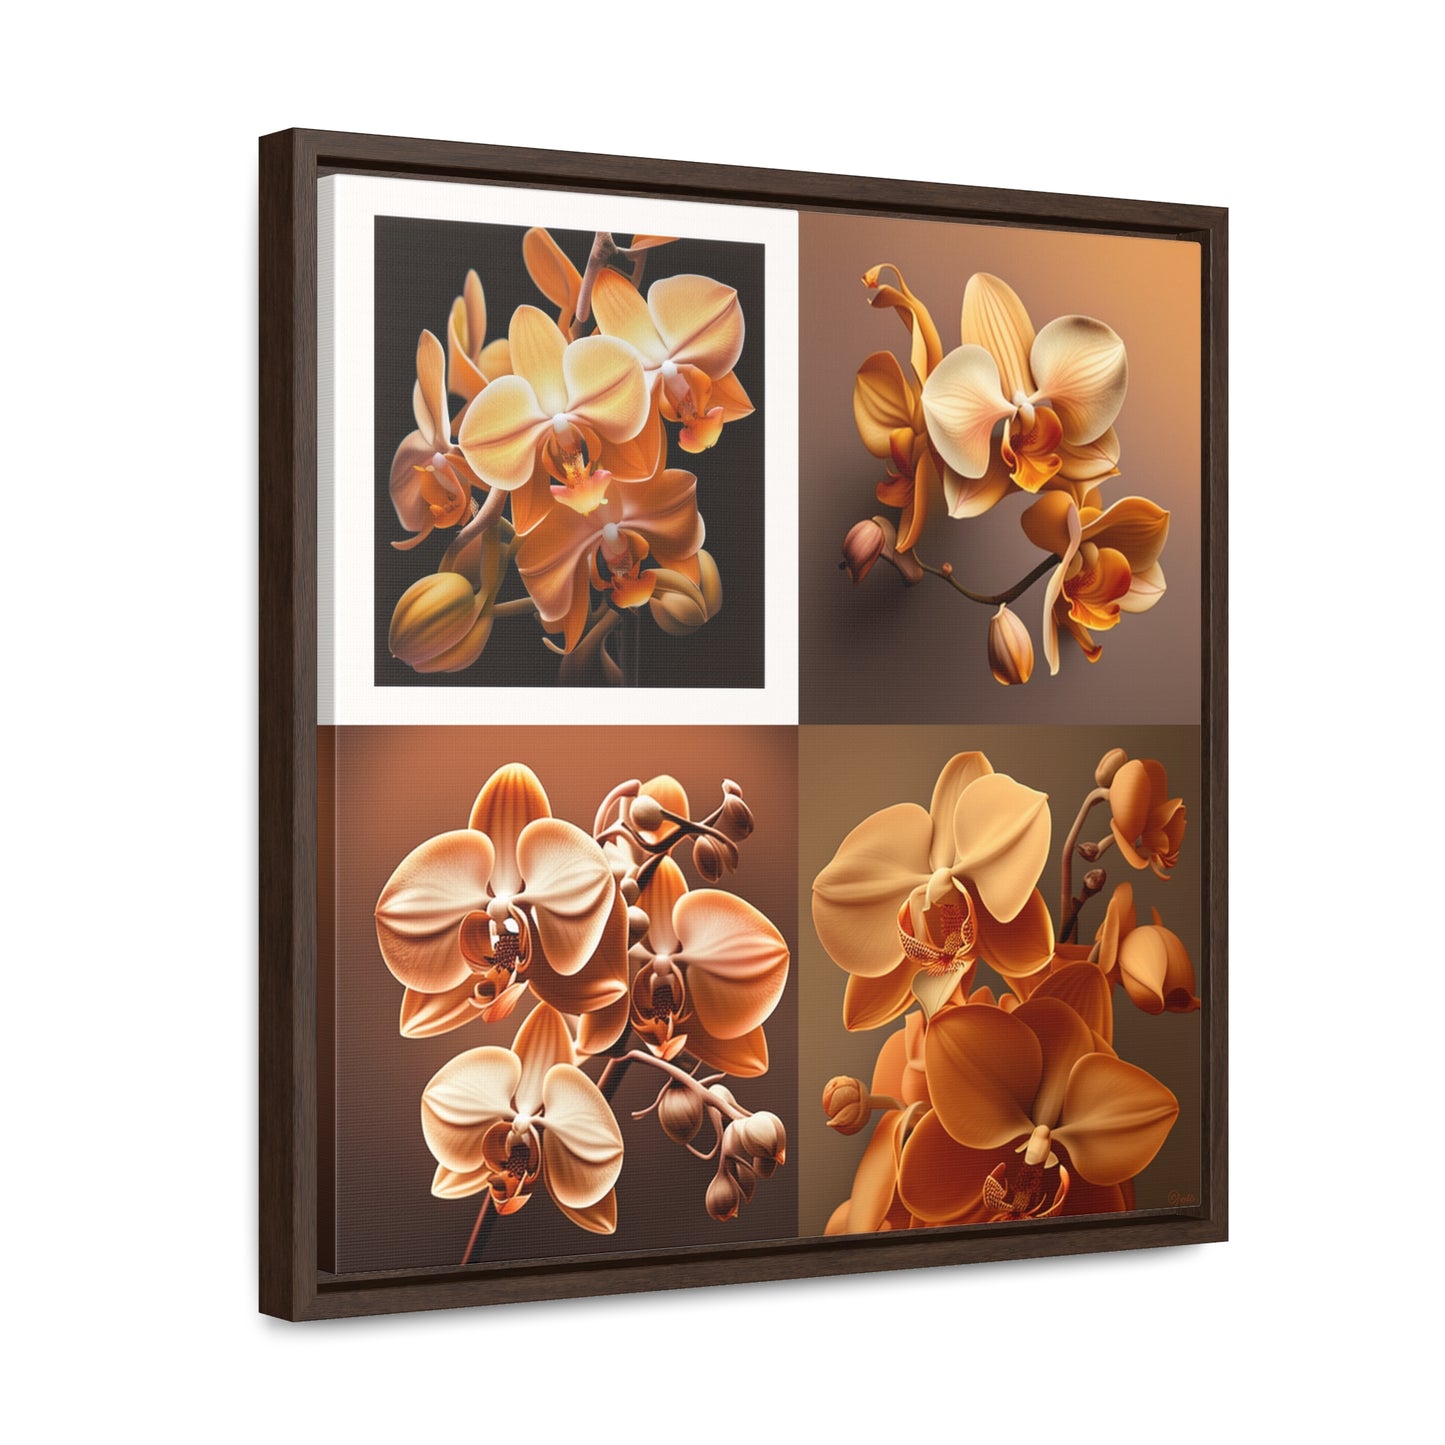 Gallery Canvas Wraps, Square Frame orchid pedals 5